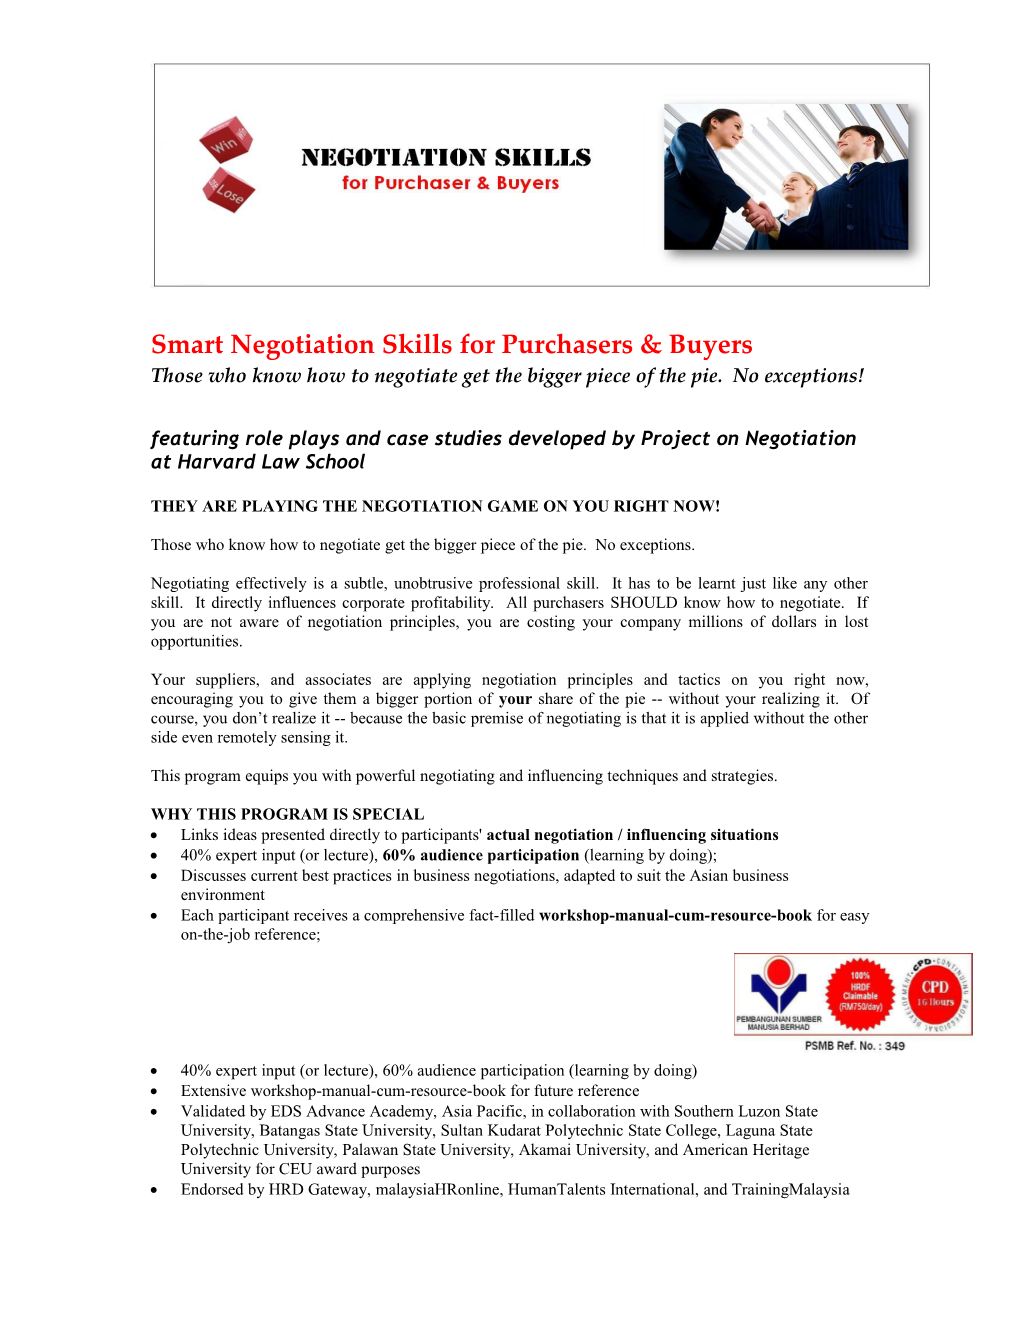 Smart Negotiation Skills for Purchasers & Buyers